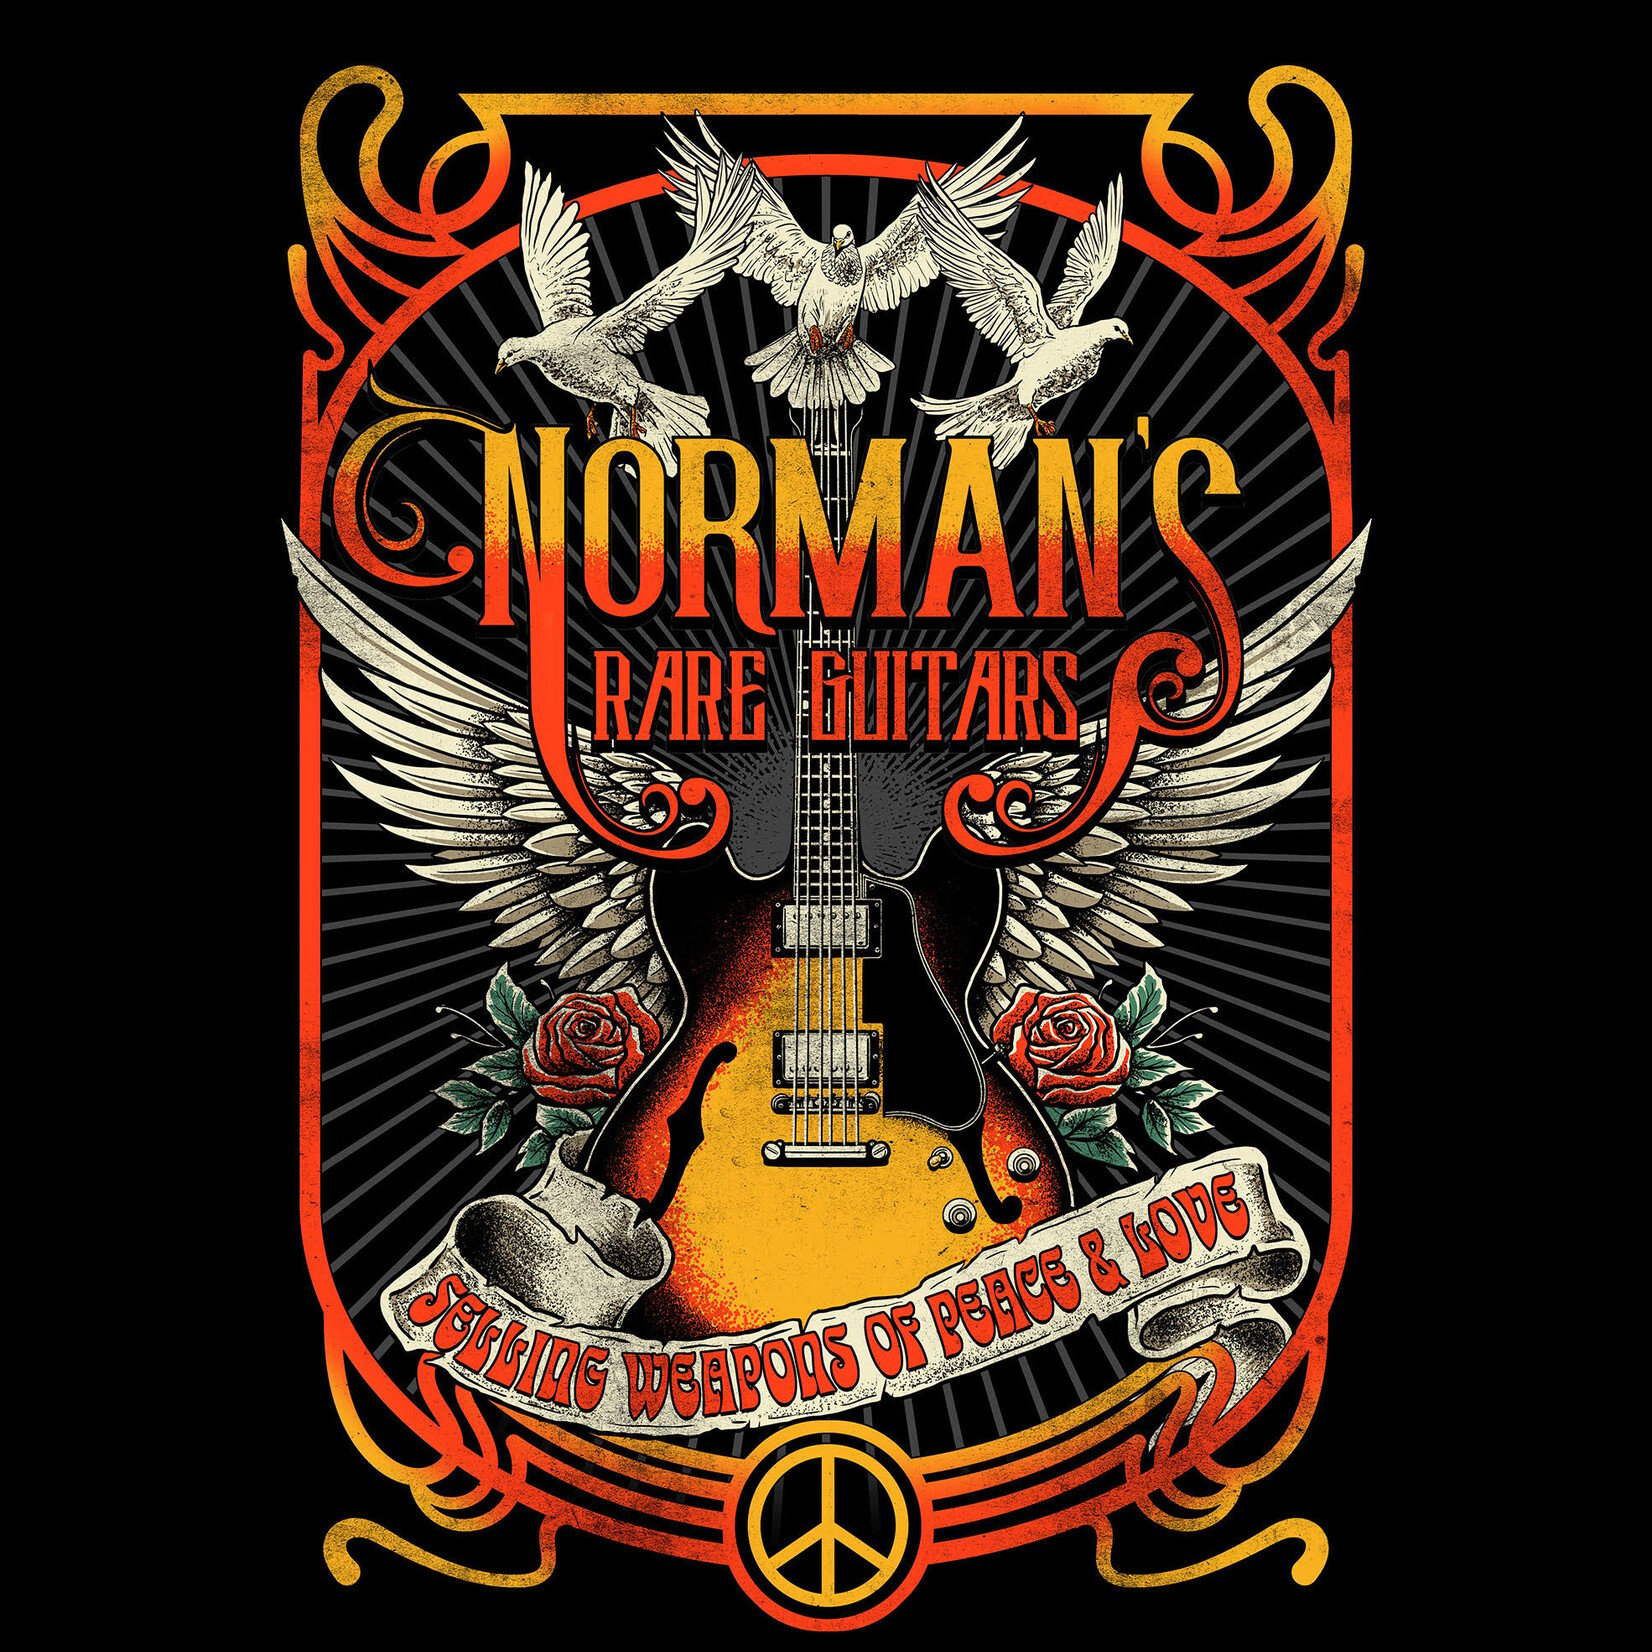 Norman's Rare Guitars Weapons of Peace & Love (Black T-Shirt)